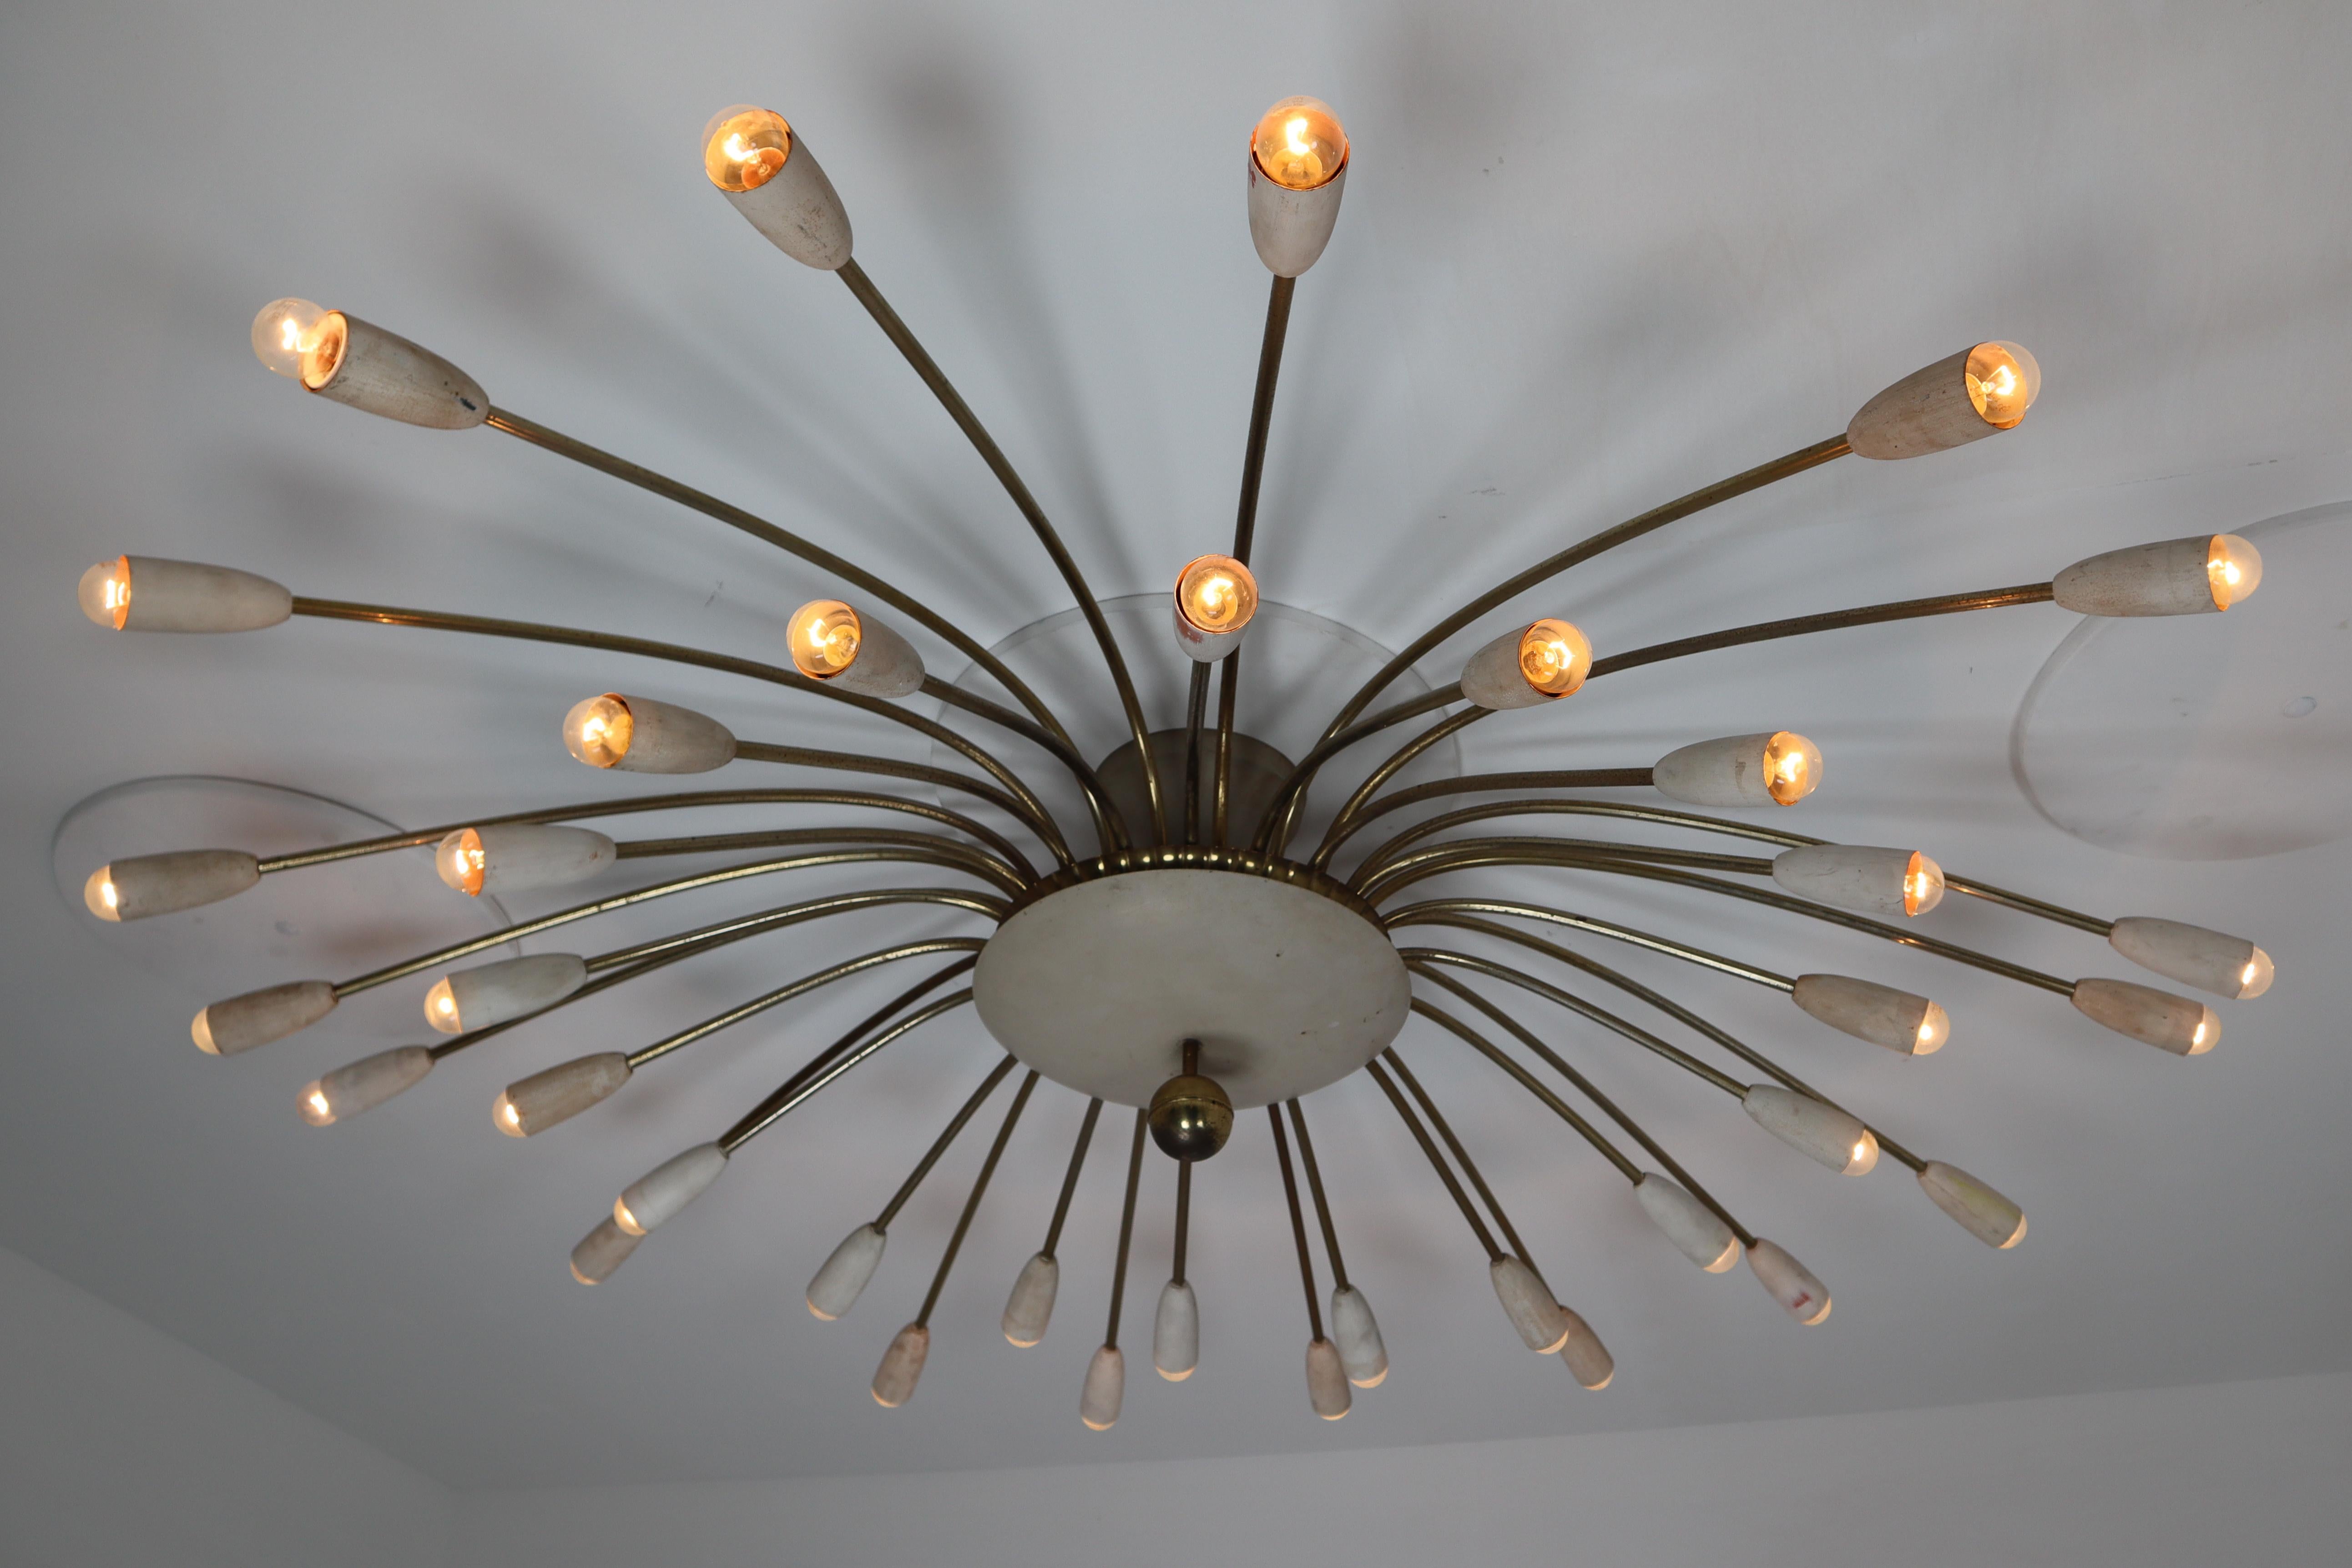 This unique midcentury modernist Sputnik features a sculptural spider form design on a patinated brass frame with accents in brass and of white encased over the (36) lights. It has been newly rewired and is in excellent original patinated condition.